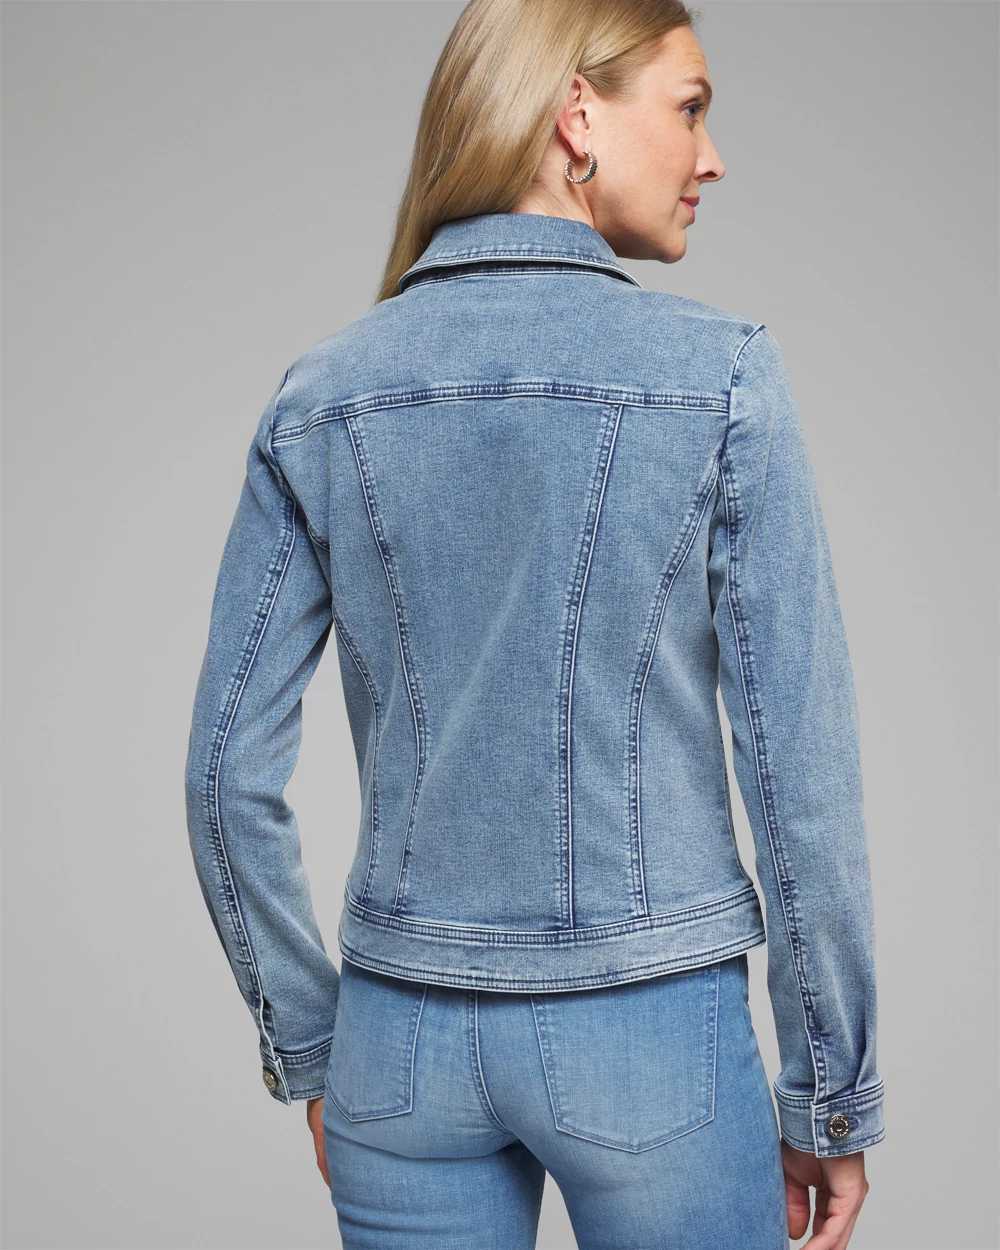 Outlet WHBM Slim Trucker Denim Jacket click to view larger image.